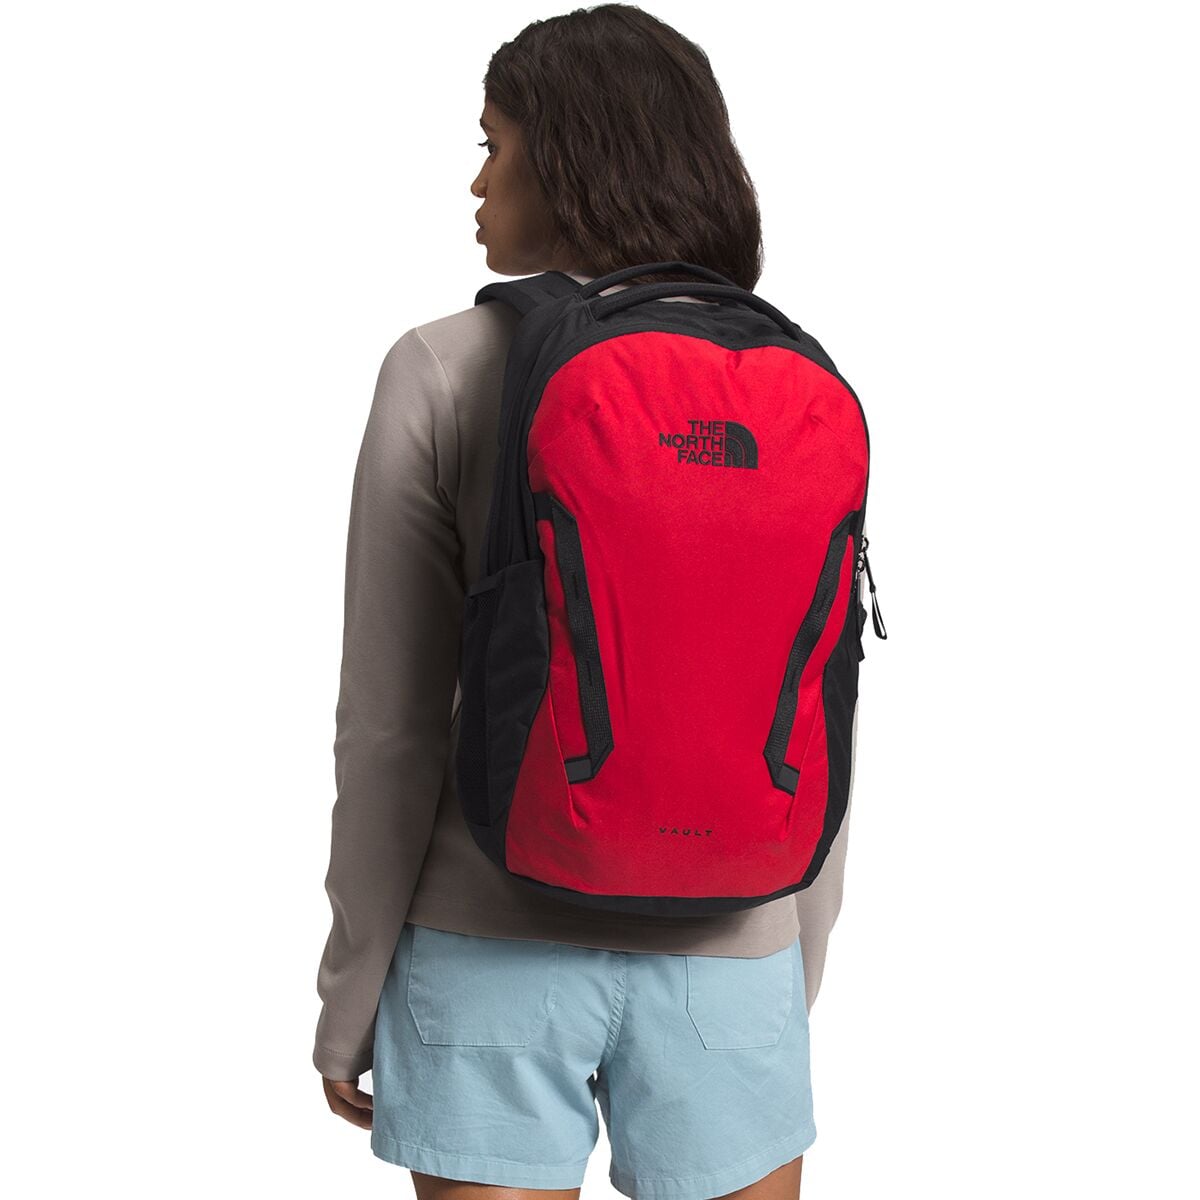 The North Face Vault 26L Backpack - Accessories